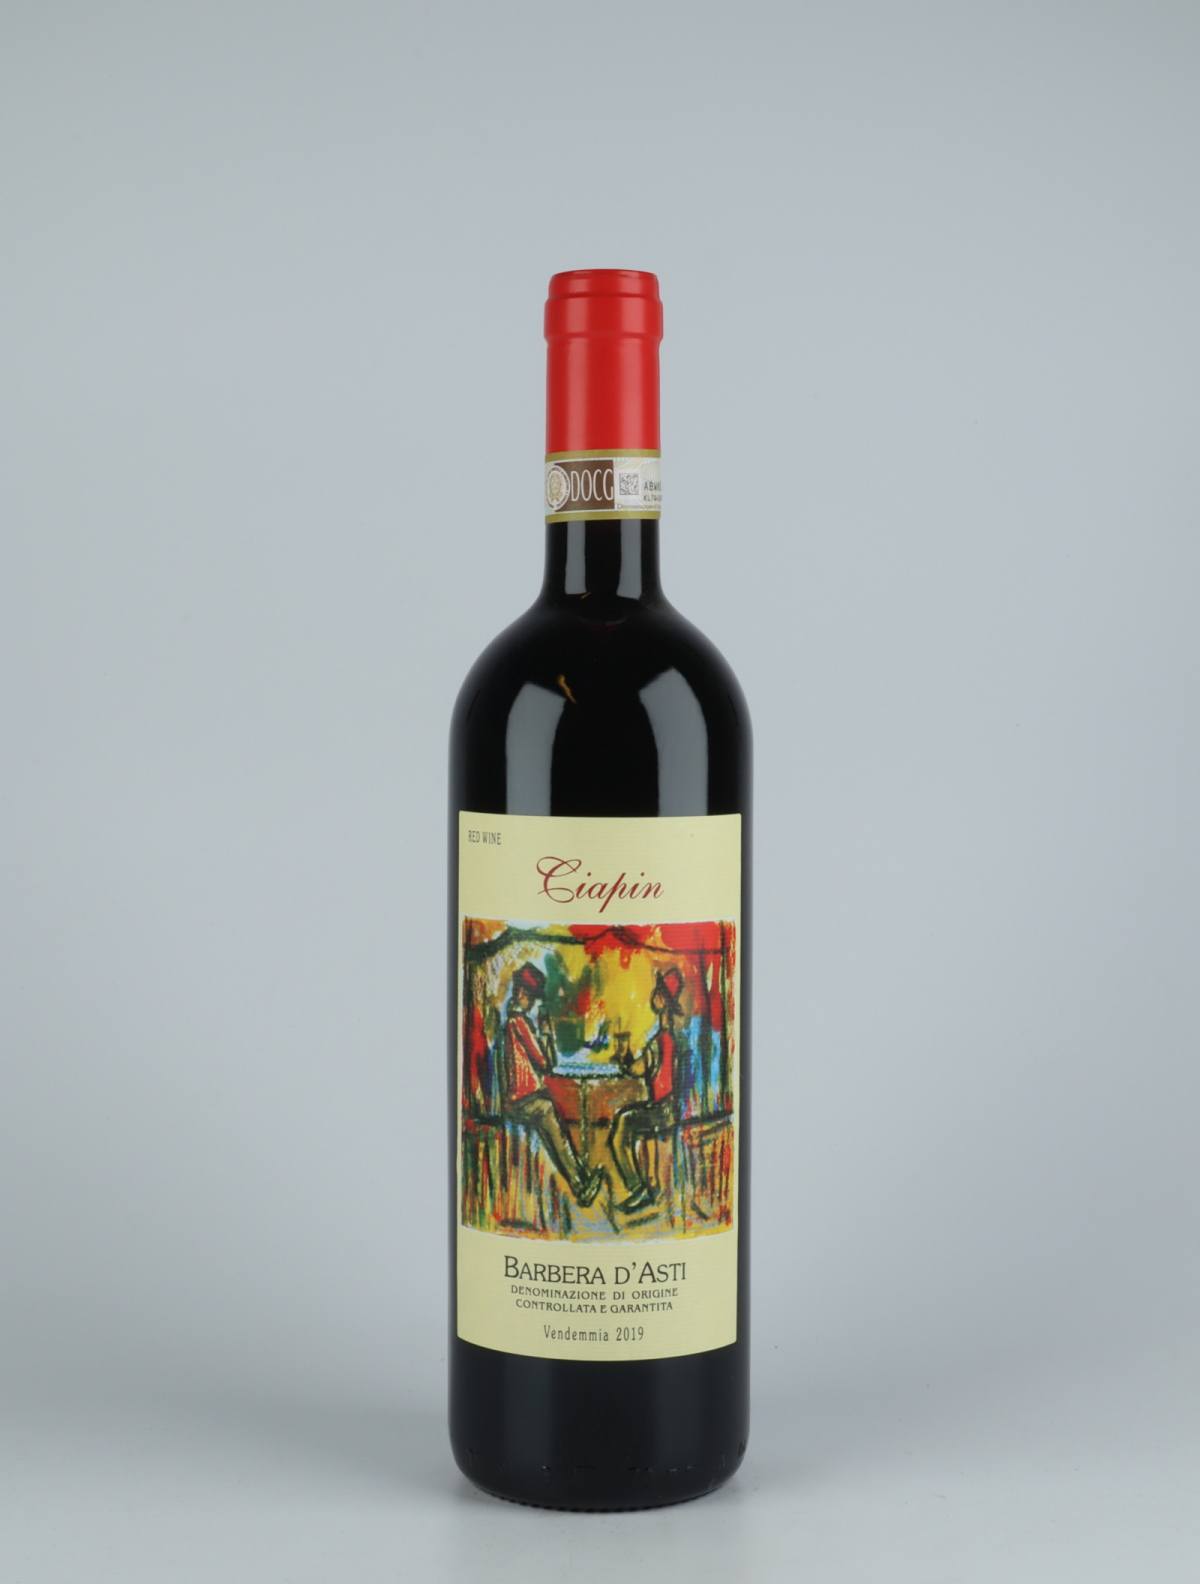 A bottle 2019 Barbera d'Asti - Ciapin Red wine from Andrea Scovero, Piedmont in Italy